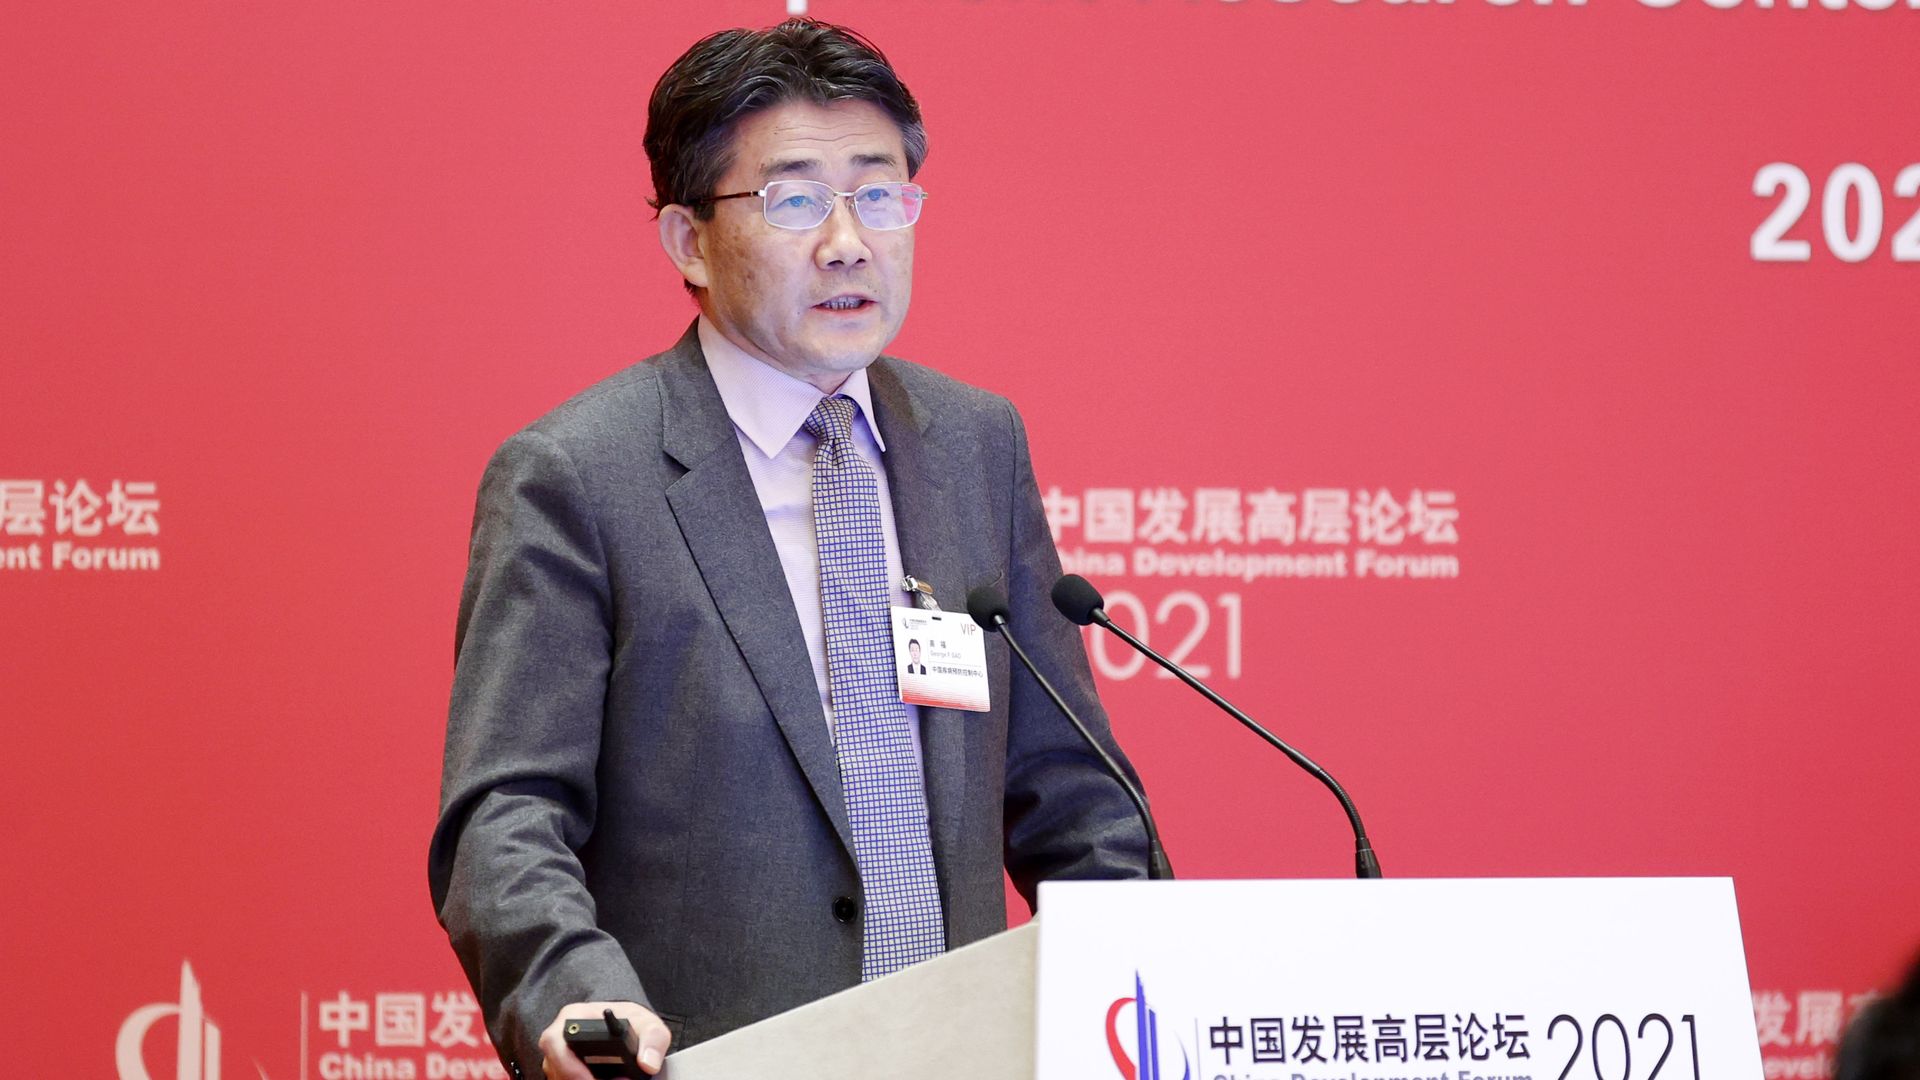  Gao Fu, director of the Chinese Center for Disease Control and Prevention, speaks during the 2021 China Development Forum at Diaoyutai State Guesthouse on March 20, 2021 in Beijing, China